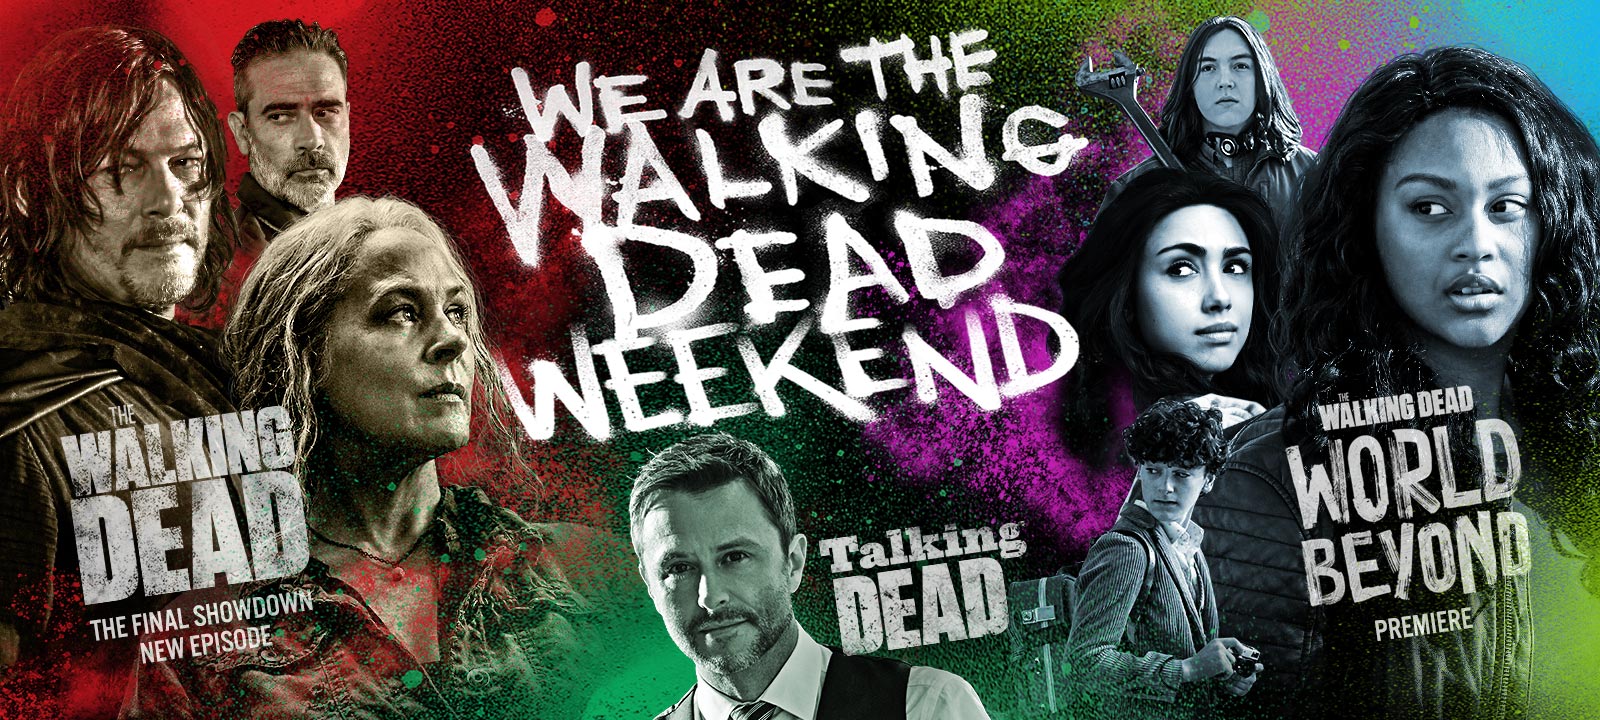 We Are The Walking Dead Weekend Amc